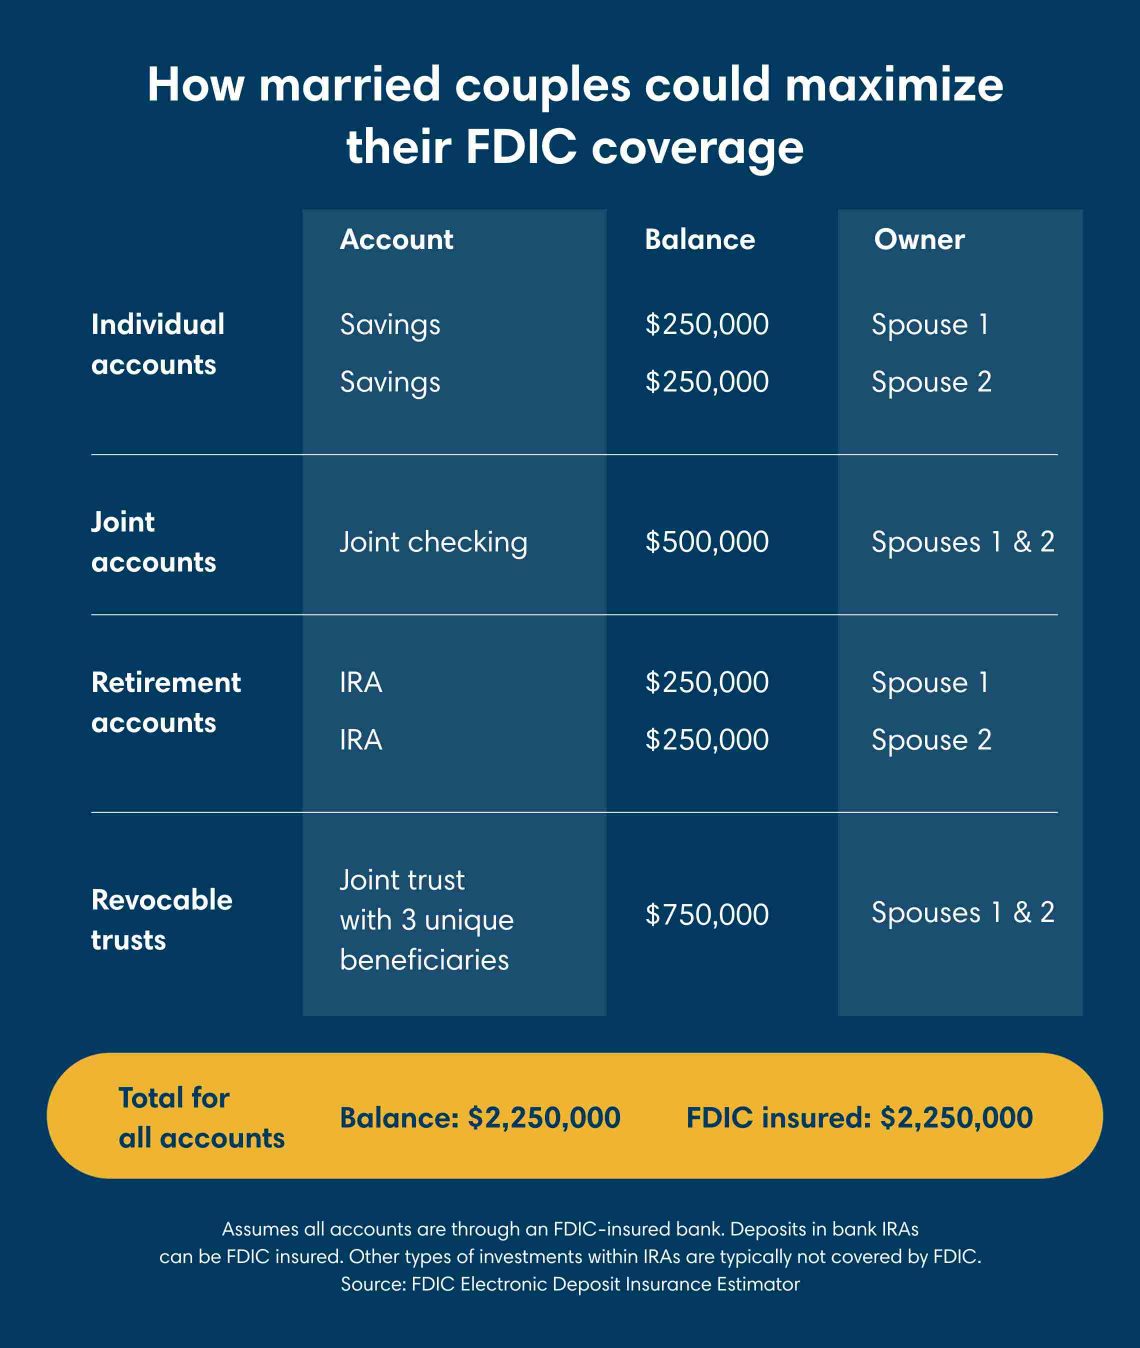 Table showing how married couples could maximize their FDIC coverage